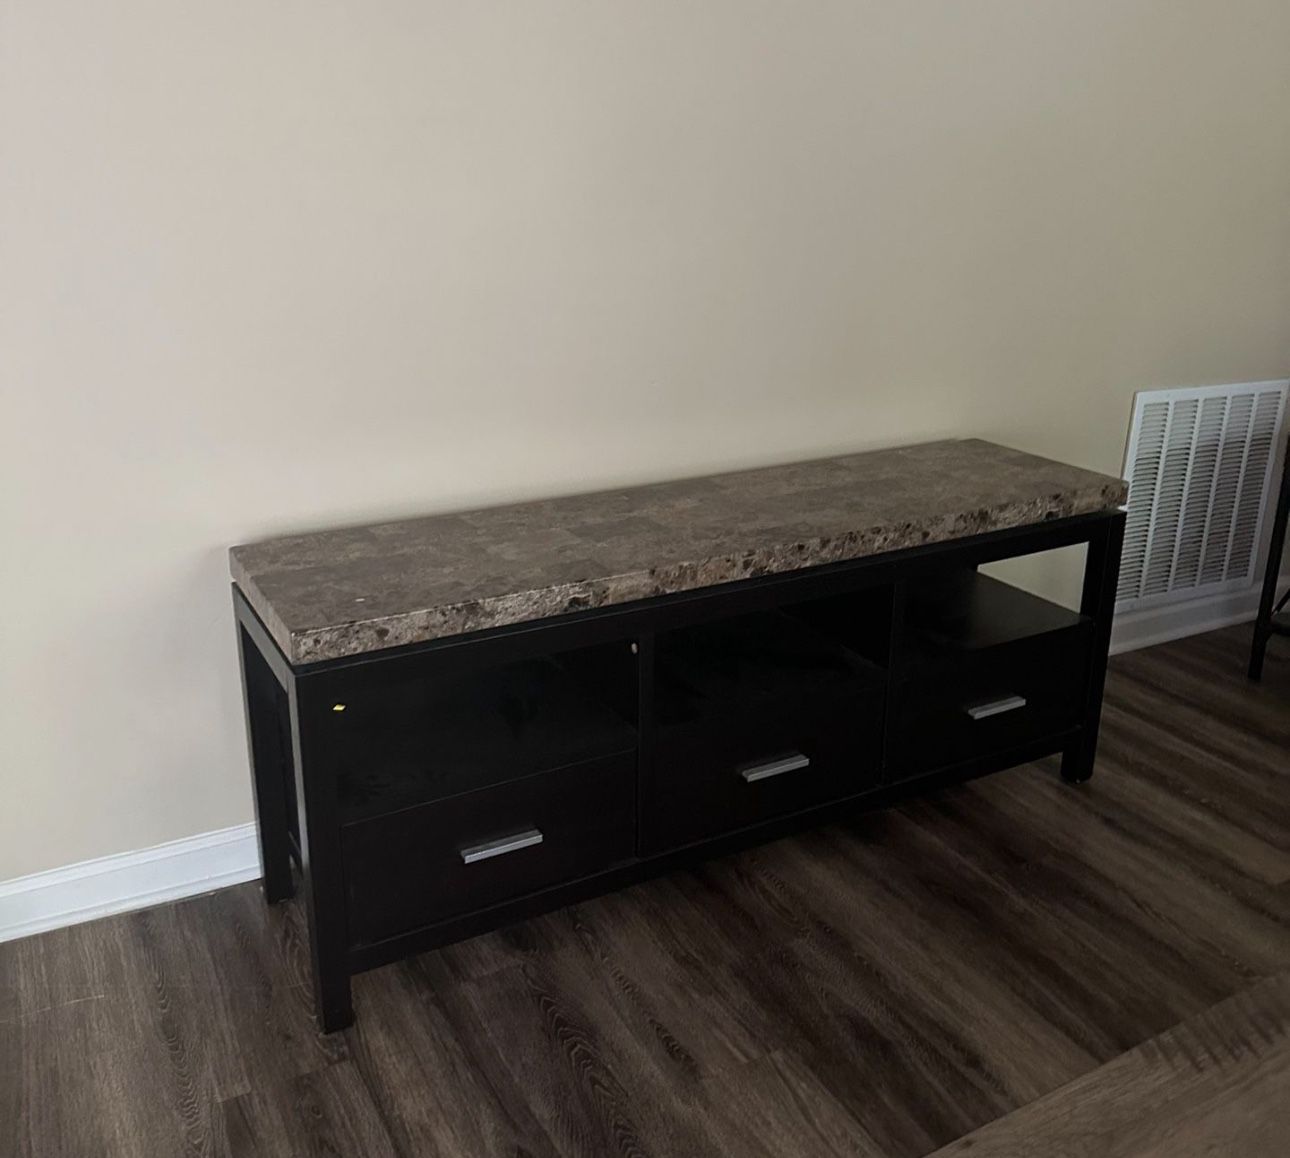 Tv stand W/ Drawers 